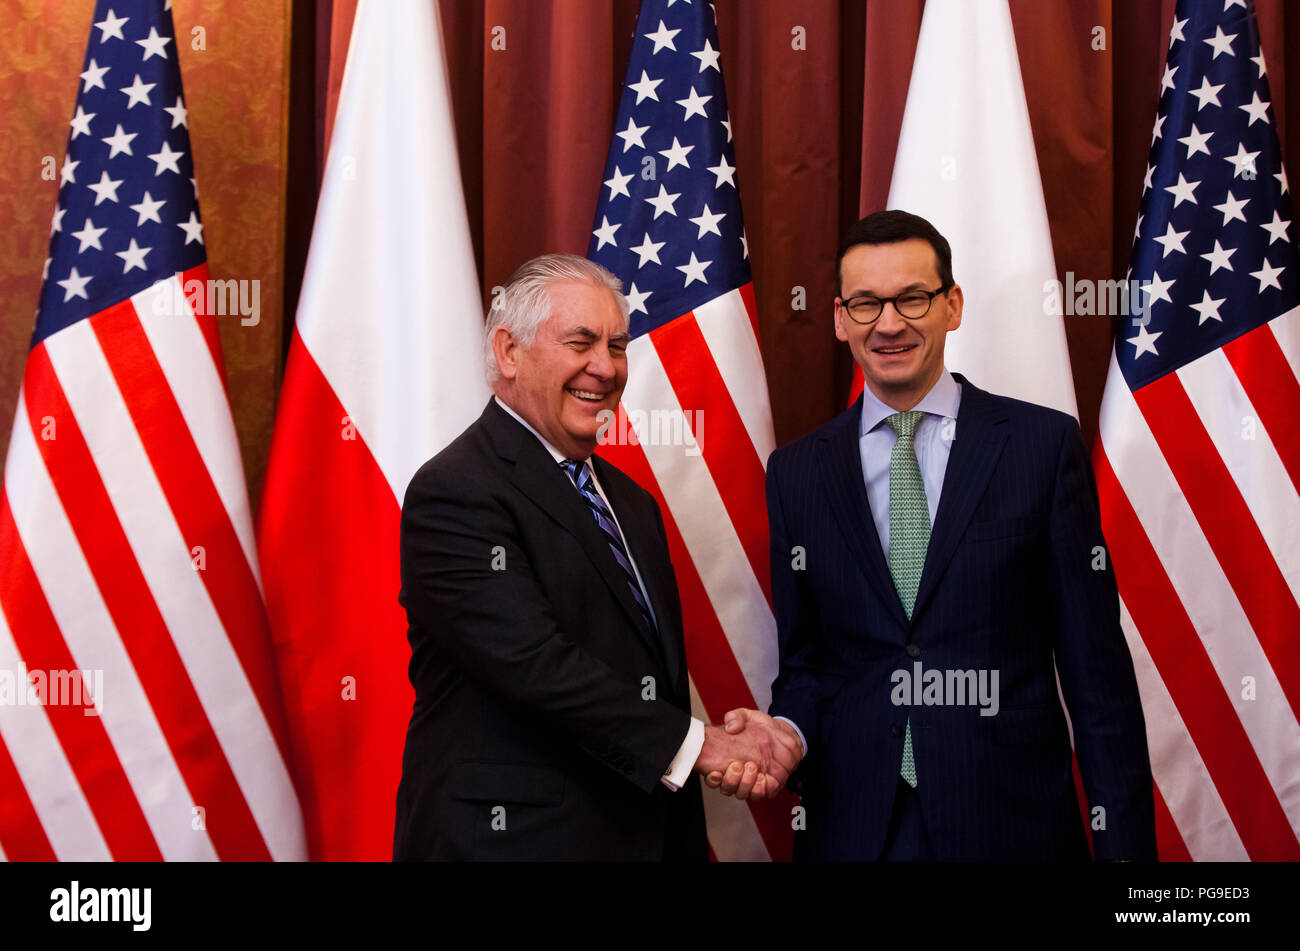 U.S Secretary of State Rex Tillerson and Polish Prime Minister Mateusz Morawiecki shake hands during their meeting in Warsaw, Poland on January 27, 2018. Stock Photo